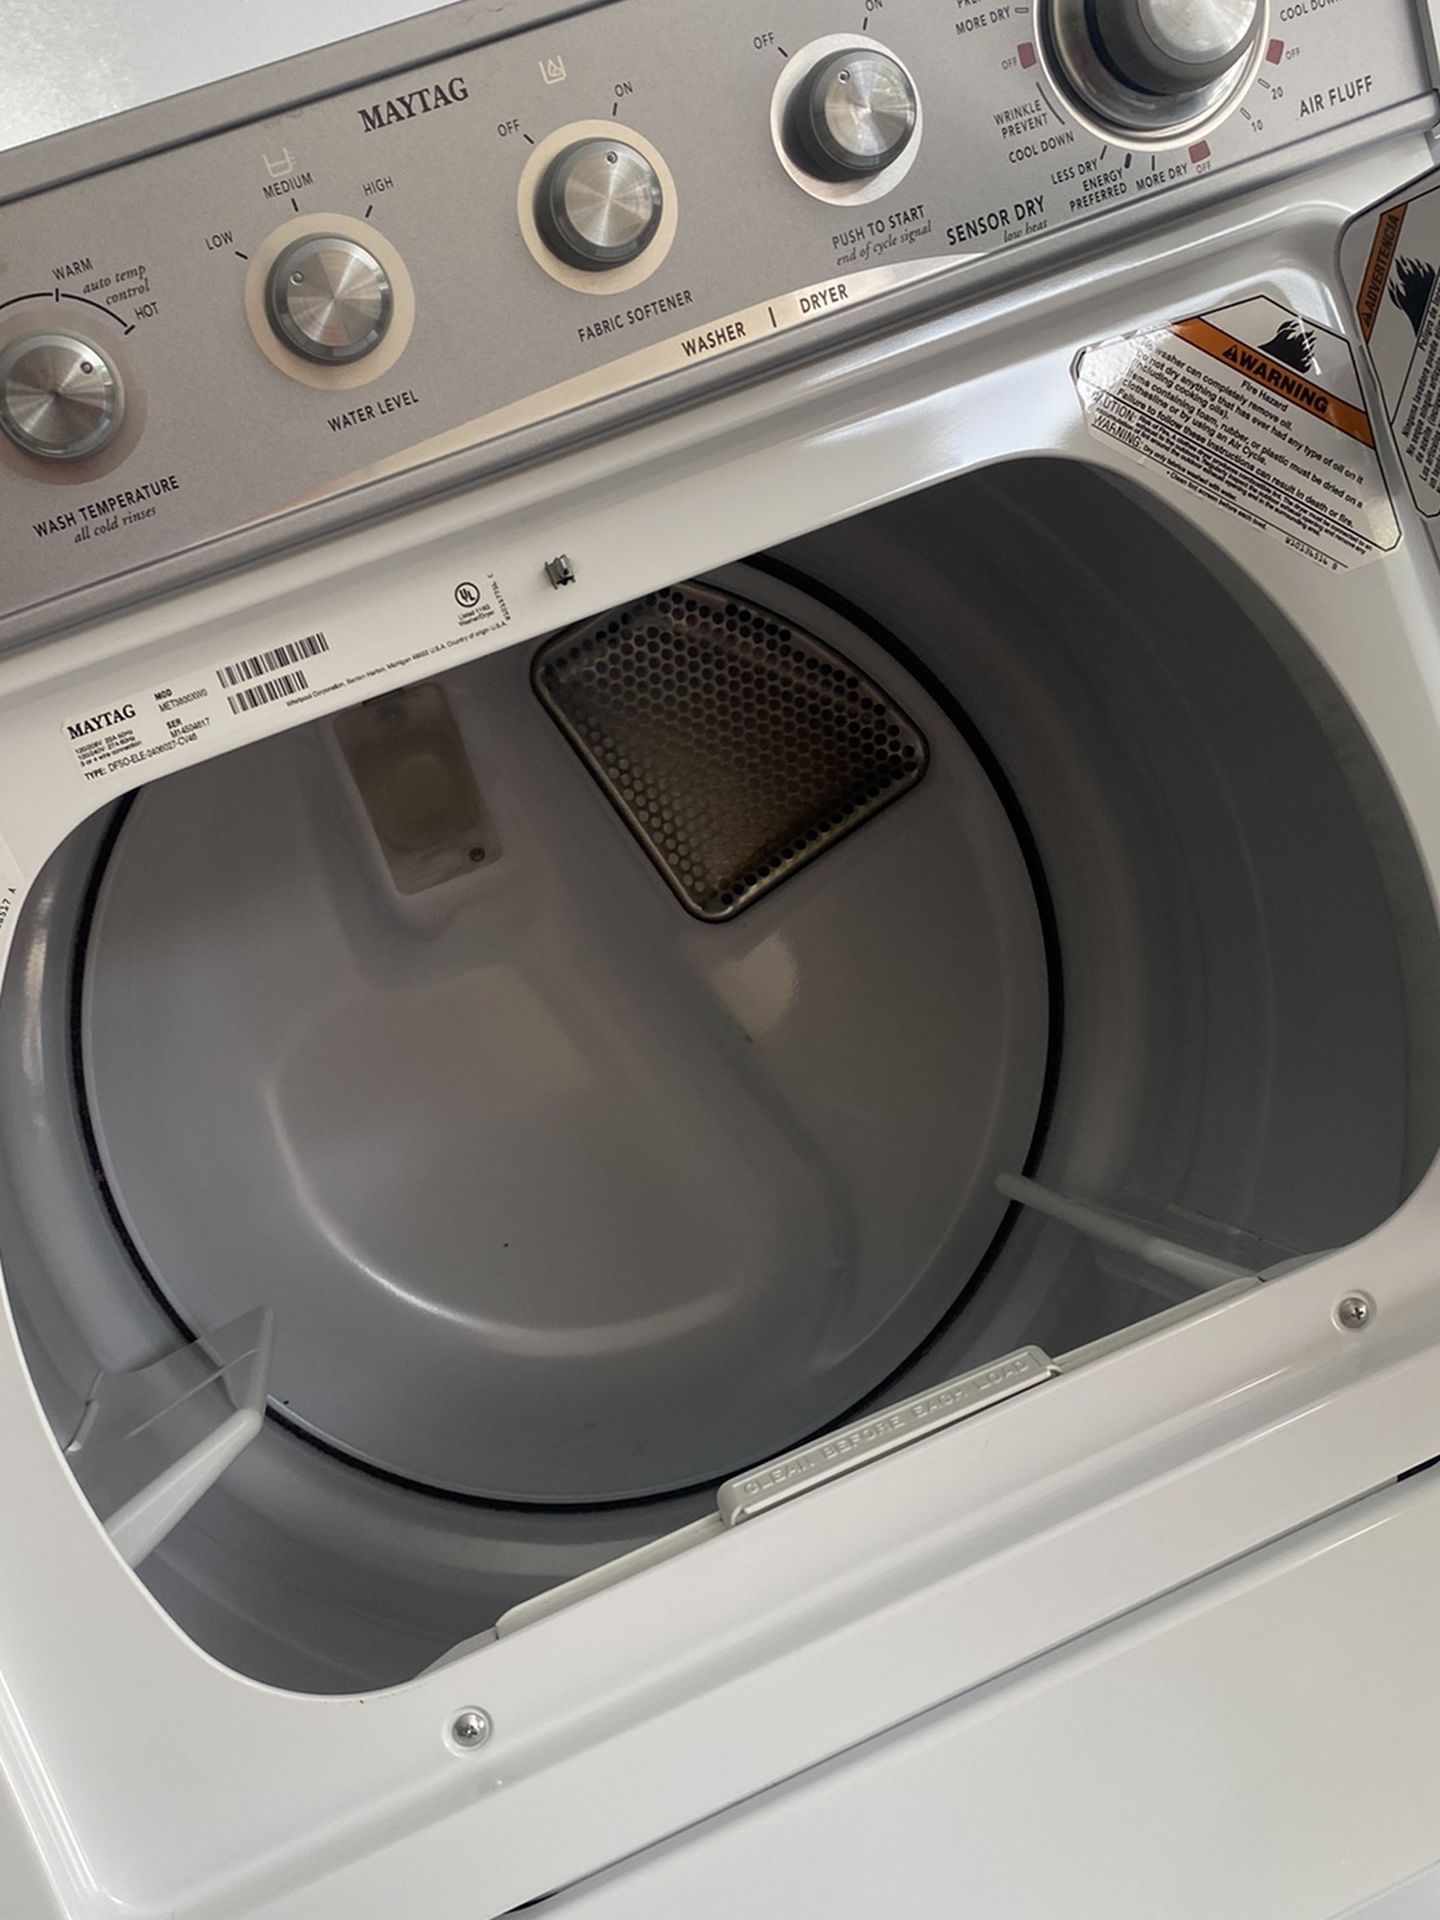 Maytag Combo 27” Washer&dryer With Warranty